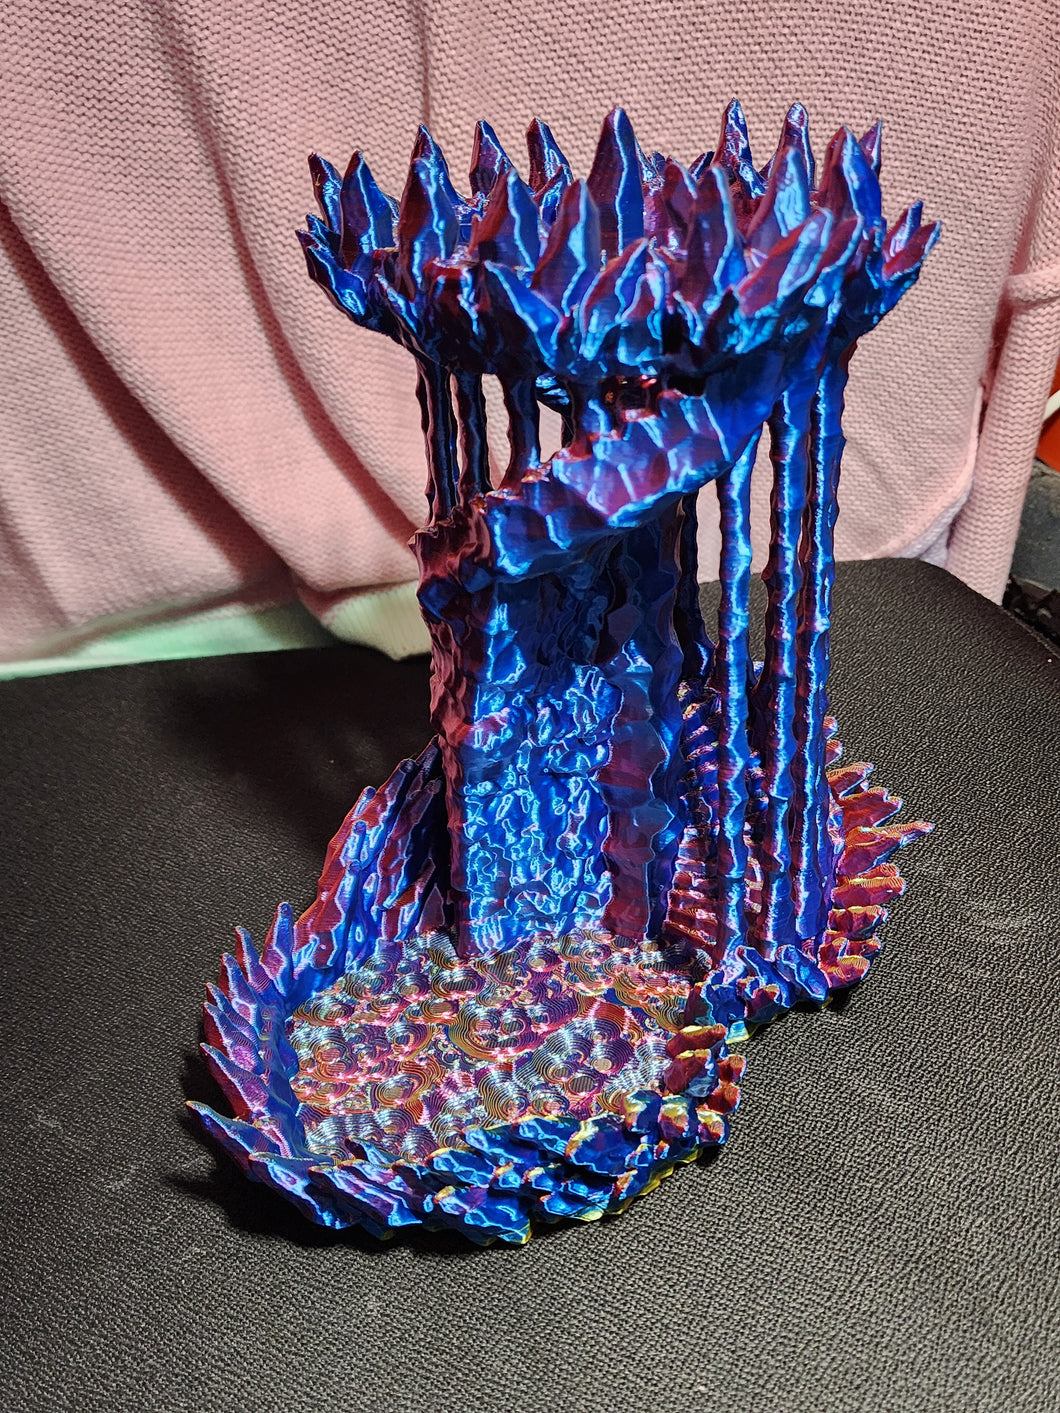 Crystal Blighted Dice Tower